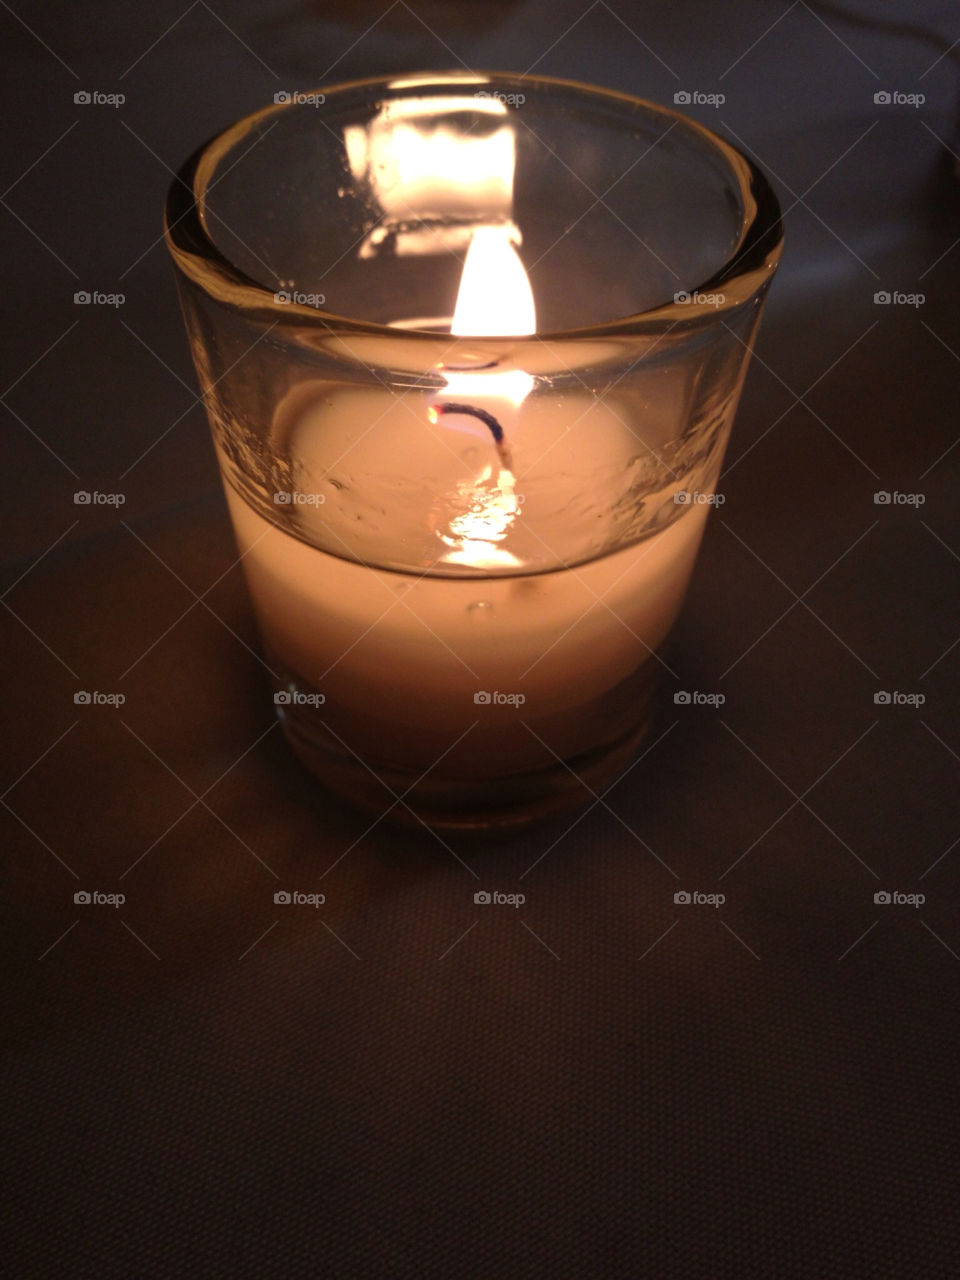 light glass fire candle by bherna05